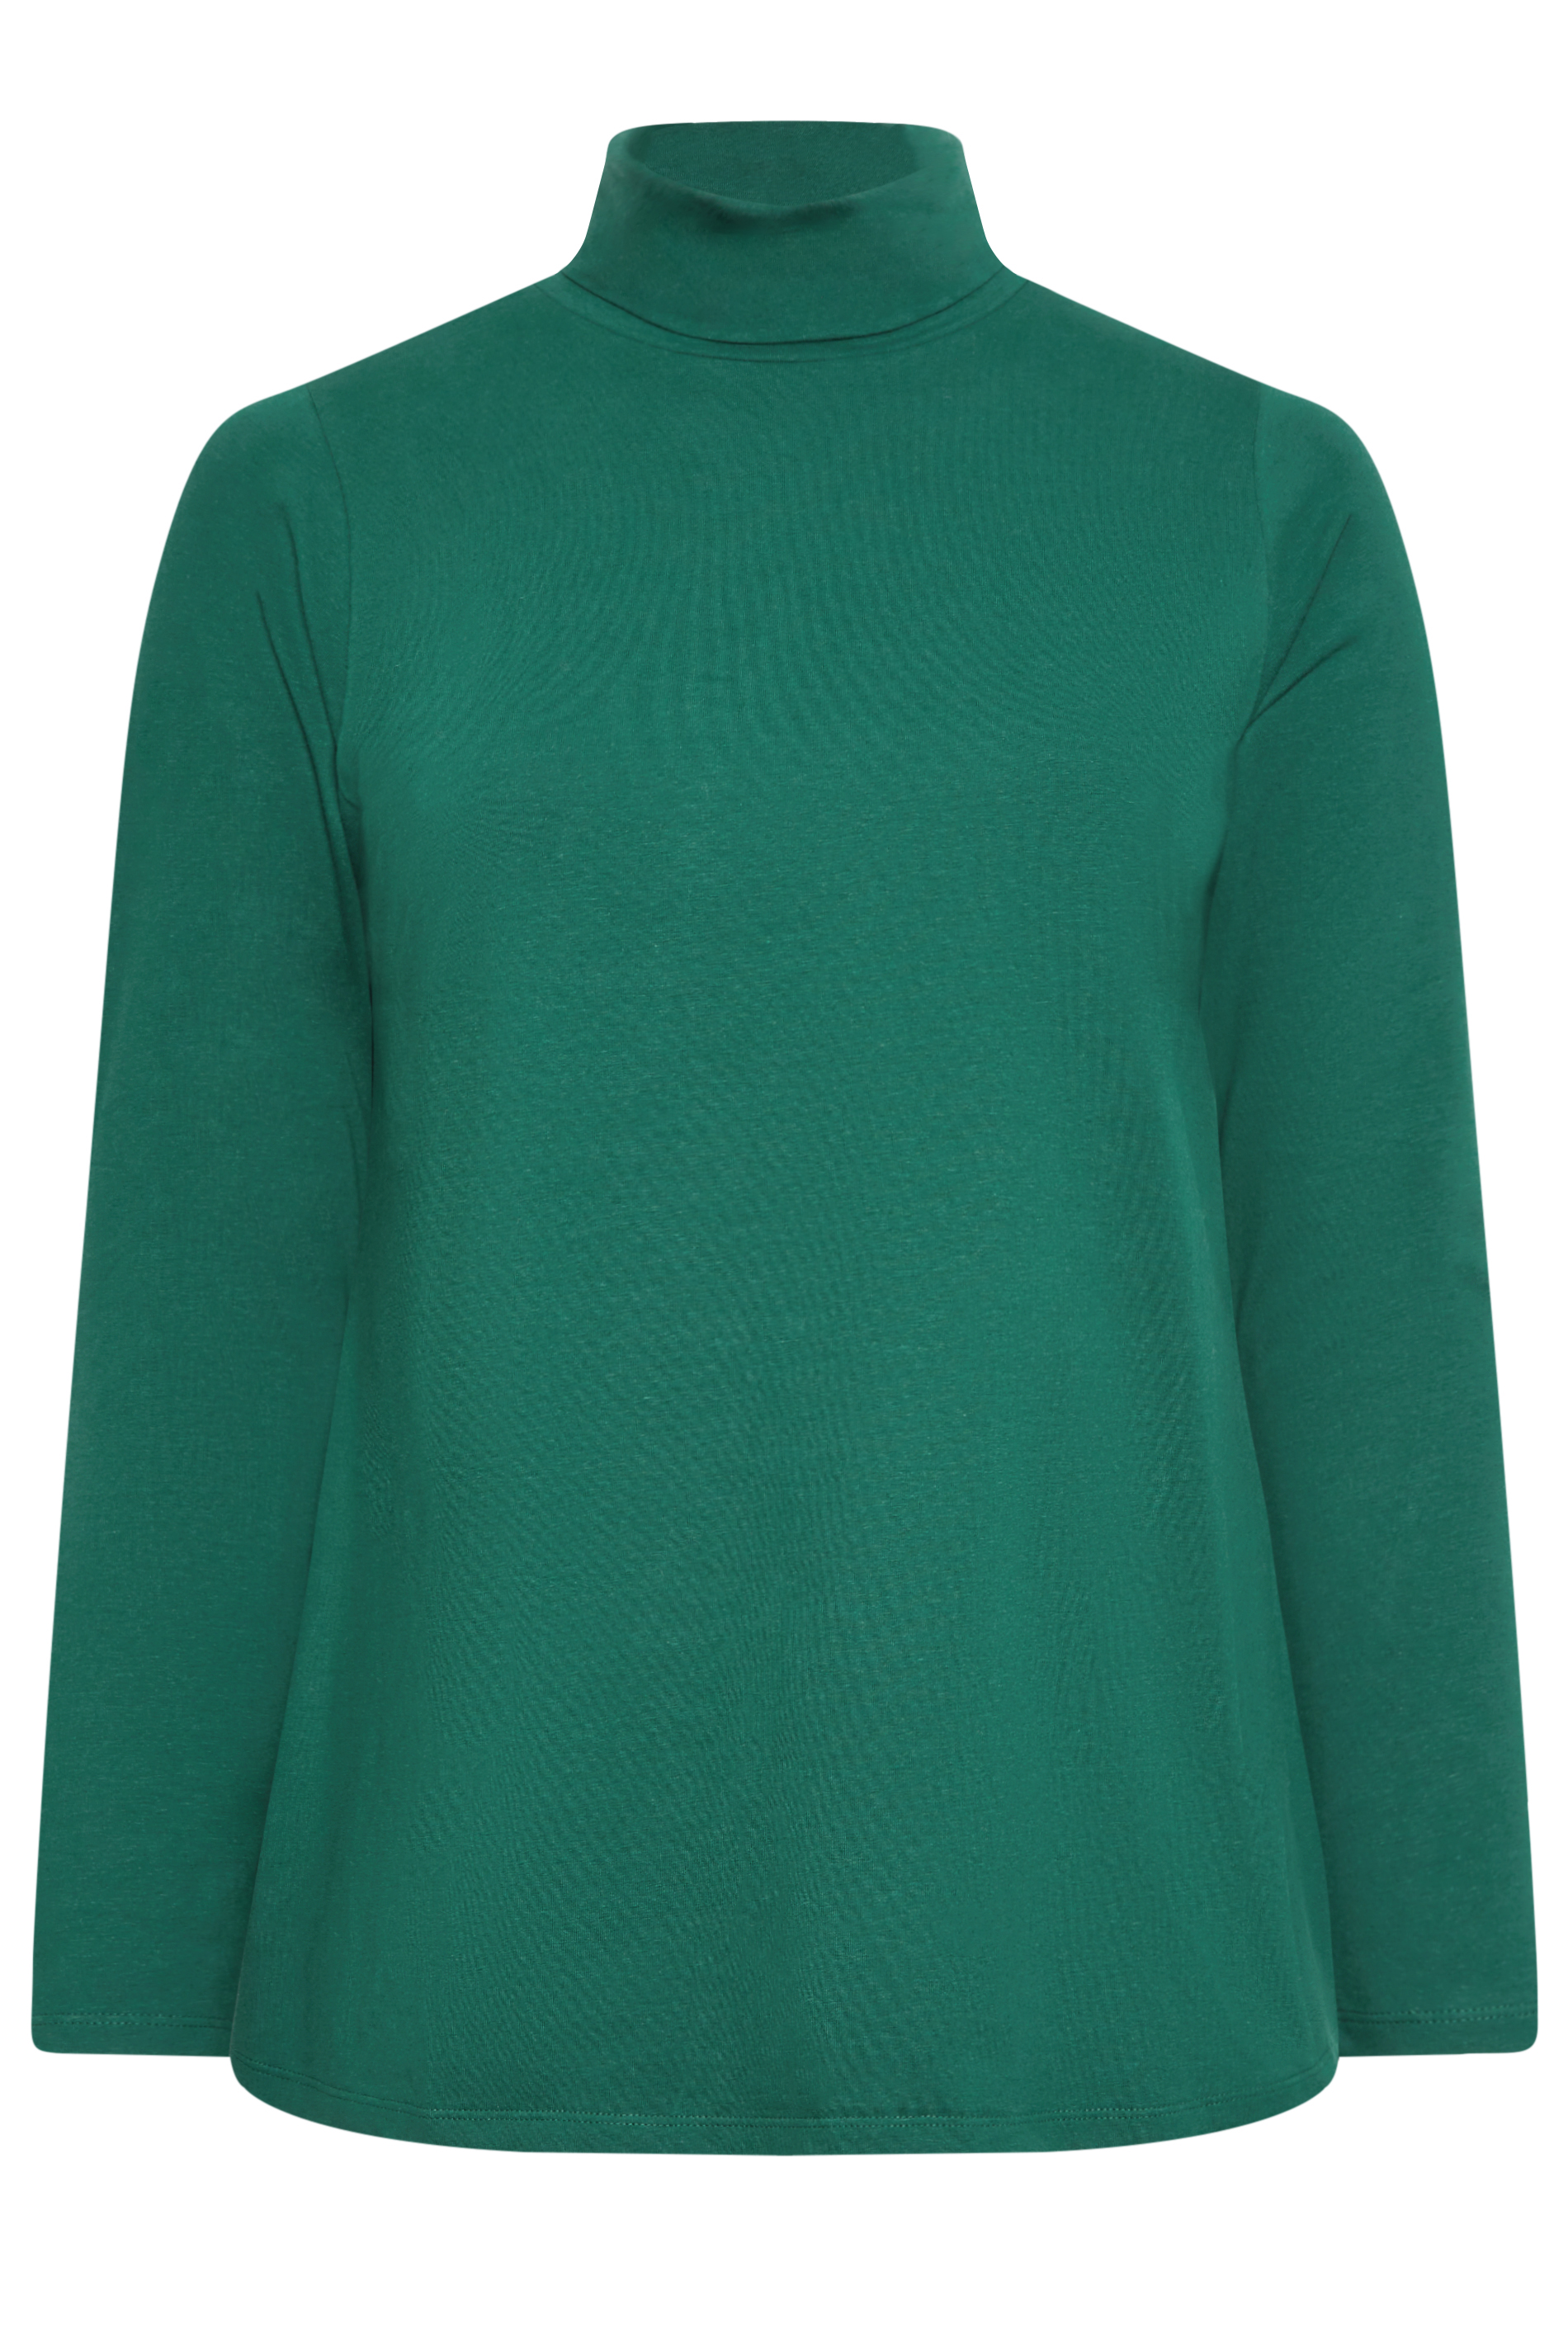 LIMITED COLLECTION Plus Size Green Marl Ribbed Turtle Neck Top